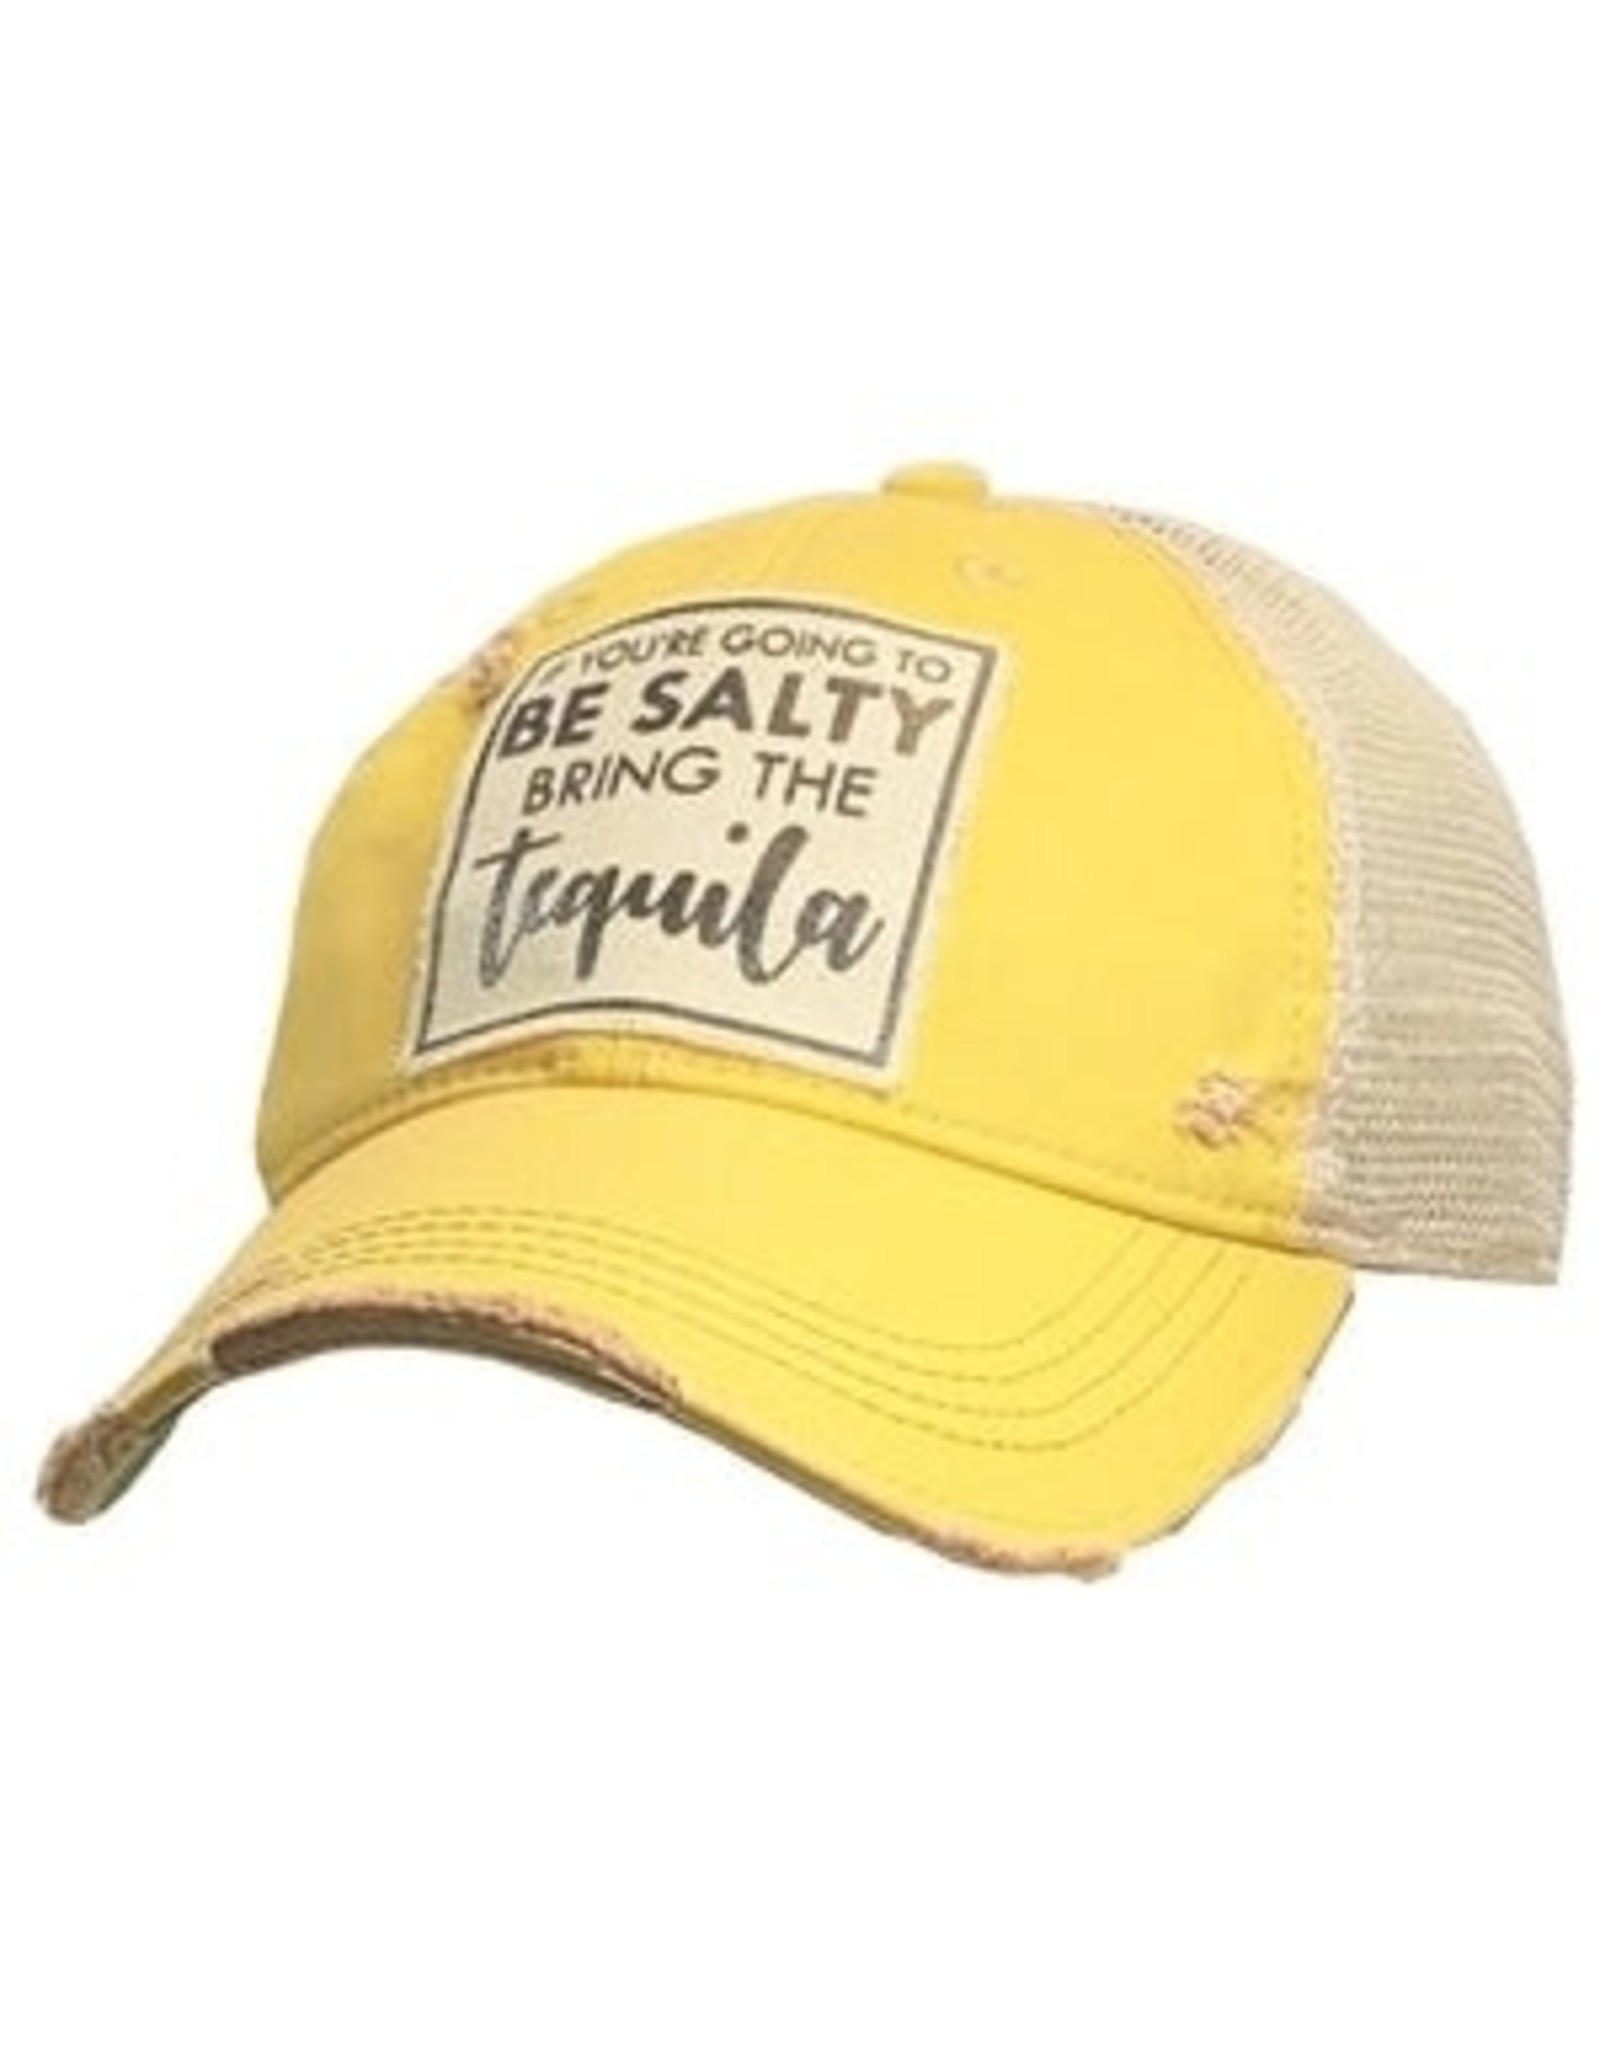 Landmark Products If You're Going To Be Salty Bring.... Distressed Trucker Cap